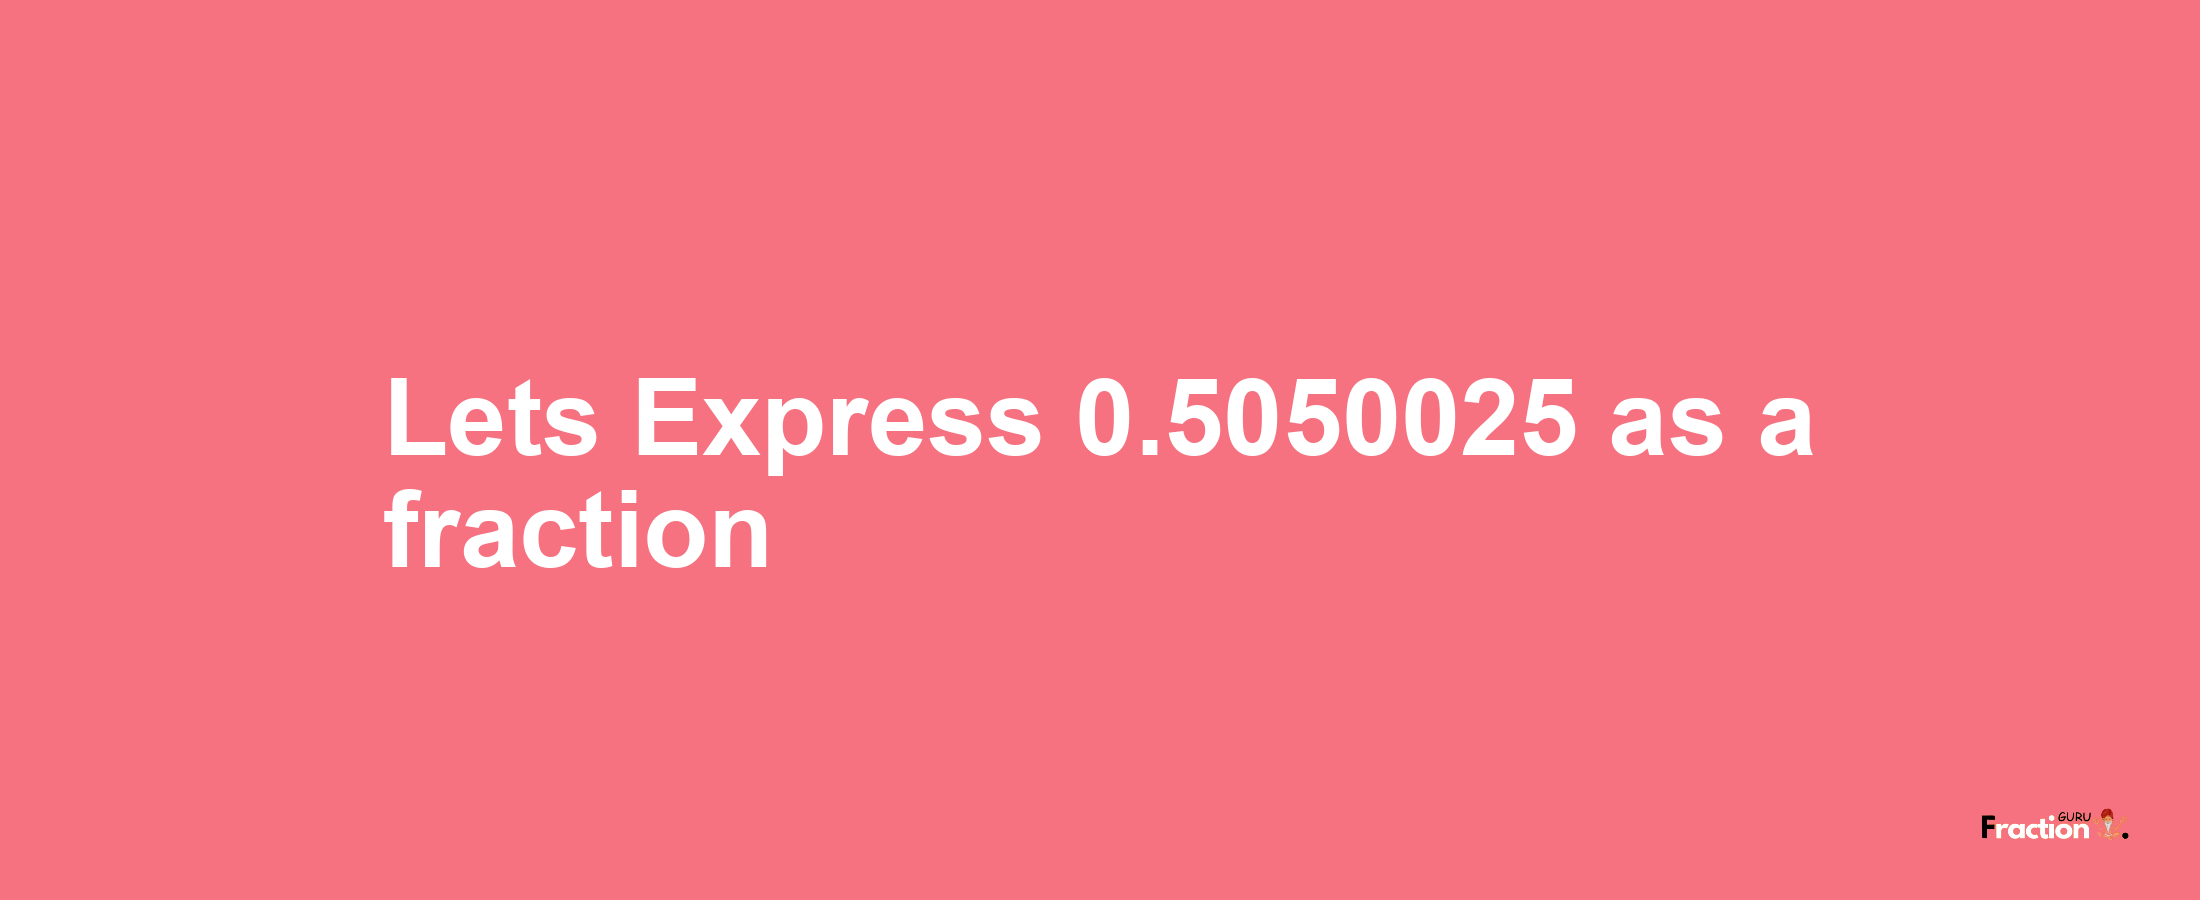 Lets Express 0.5050025 as afraction